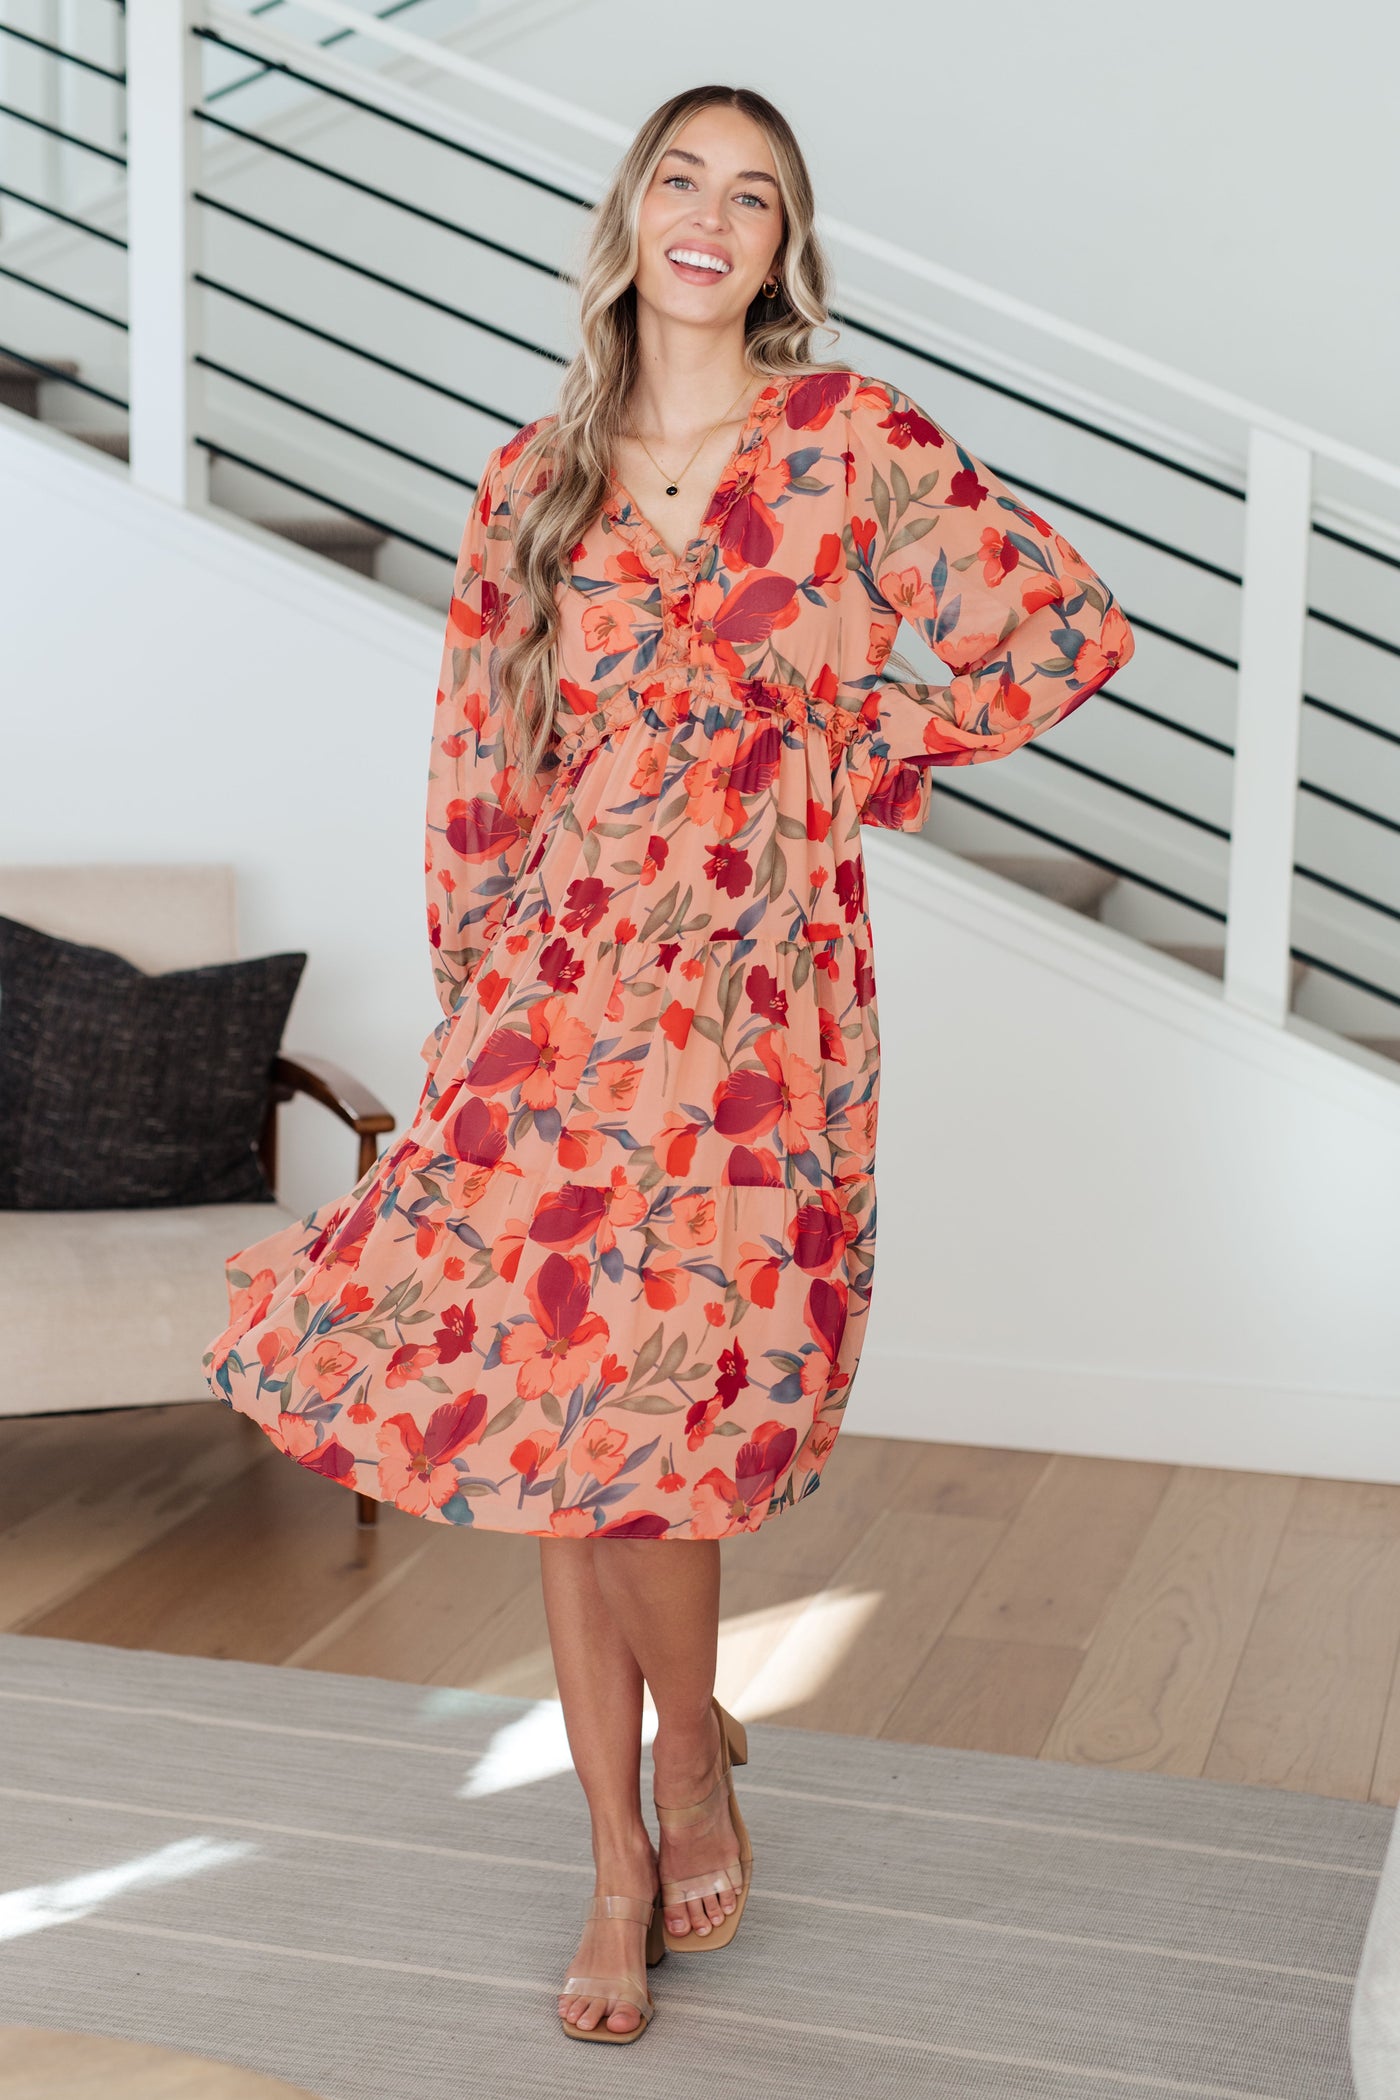 Look oh-so-chic in the You And Me Floral Dress! Featuring a flattering ruffled v-neckline, long sleeves, and a gorgeous floral print chiffon, this dress will make you feel beautiful in every way